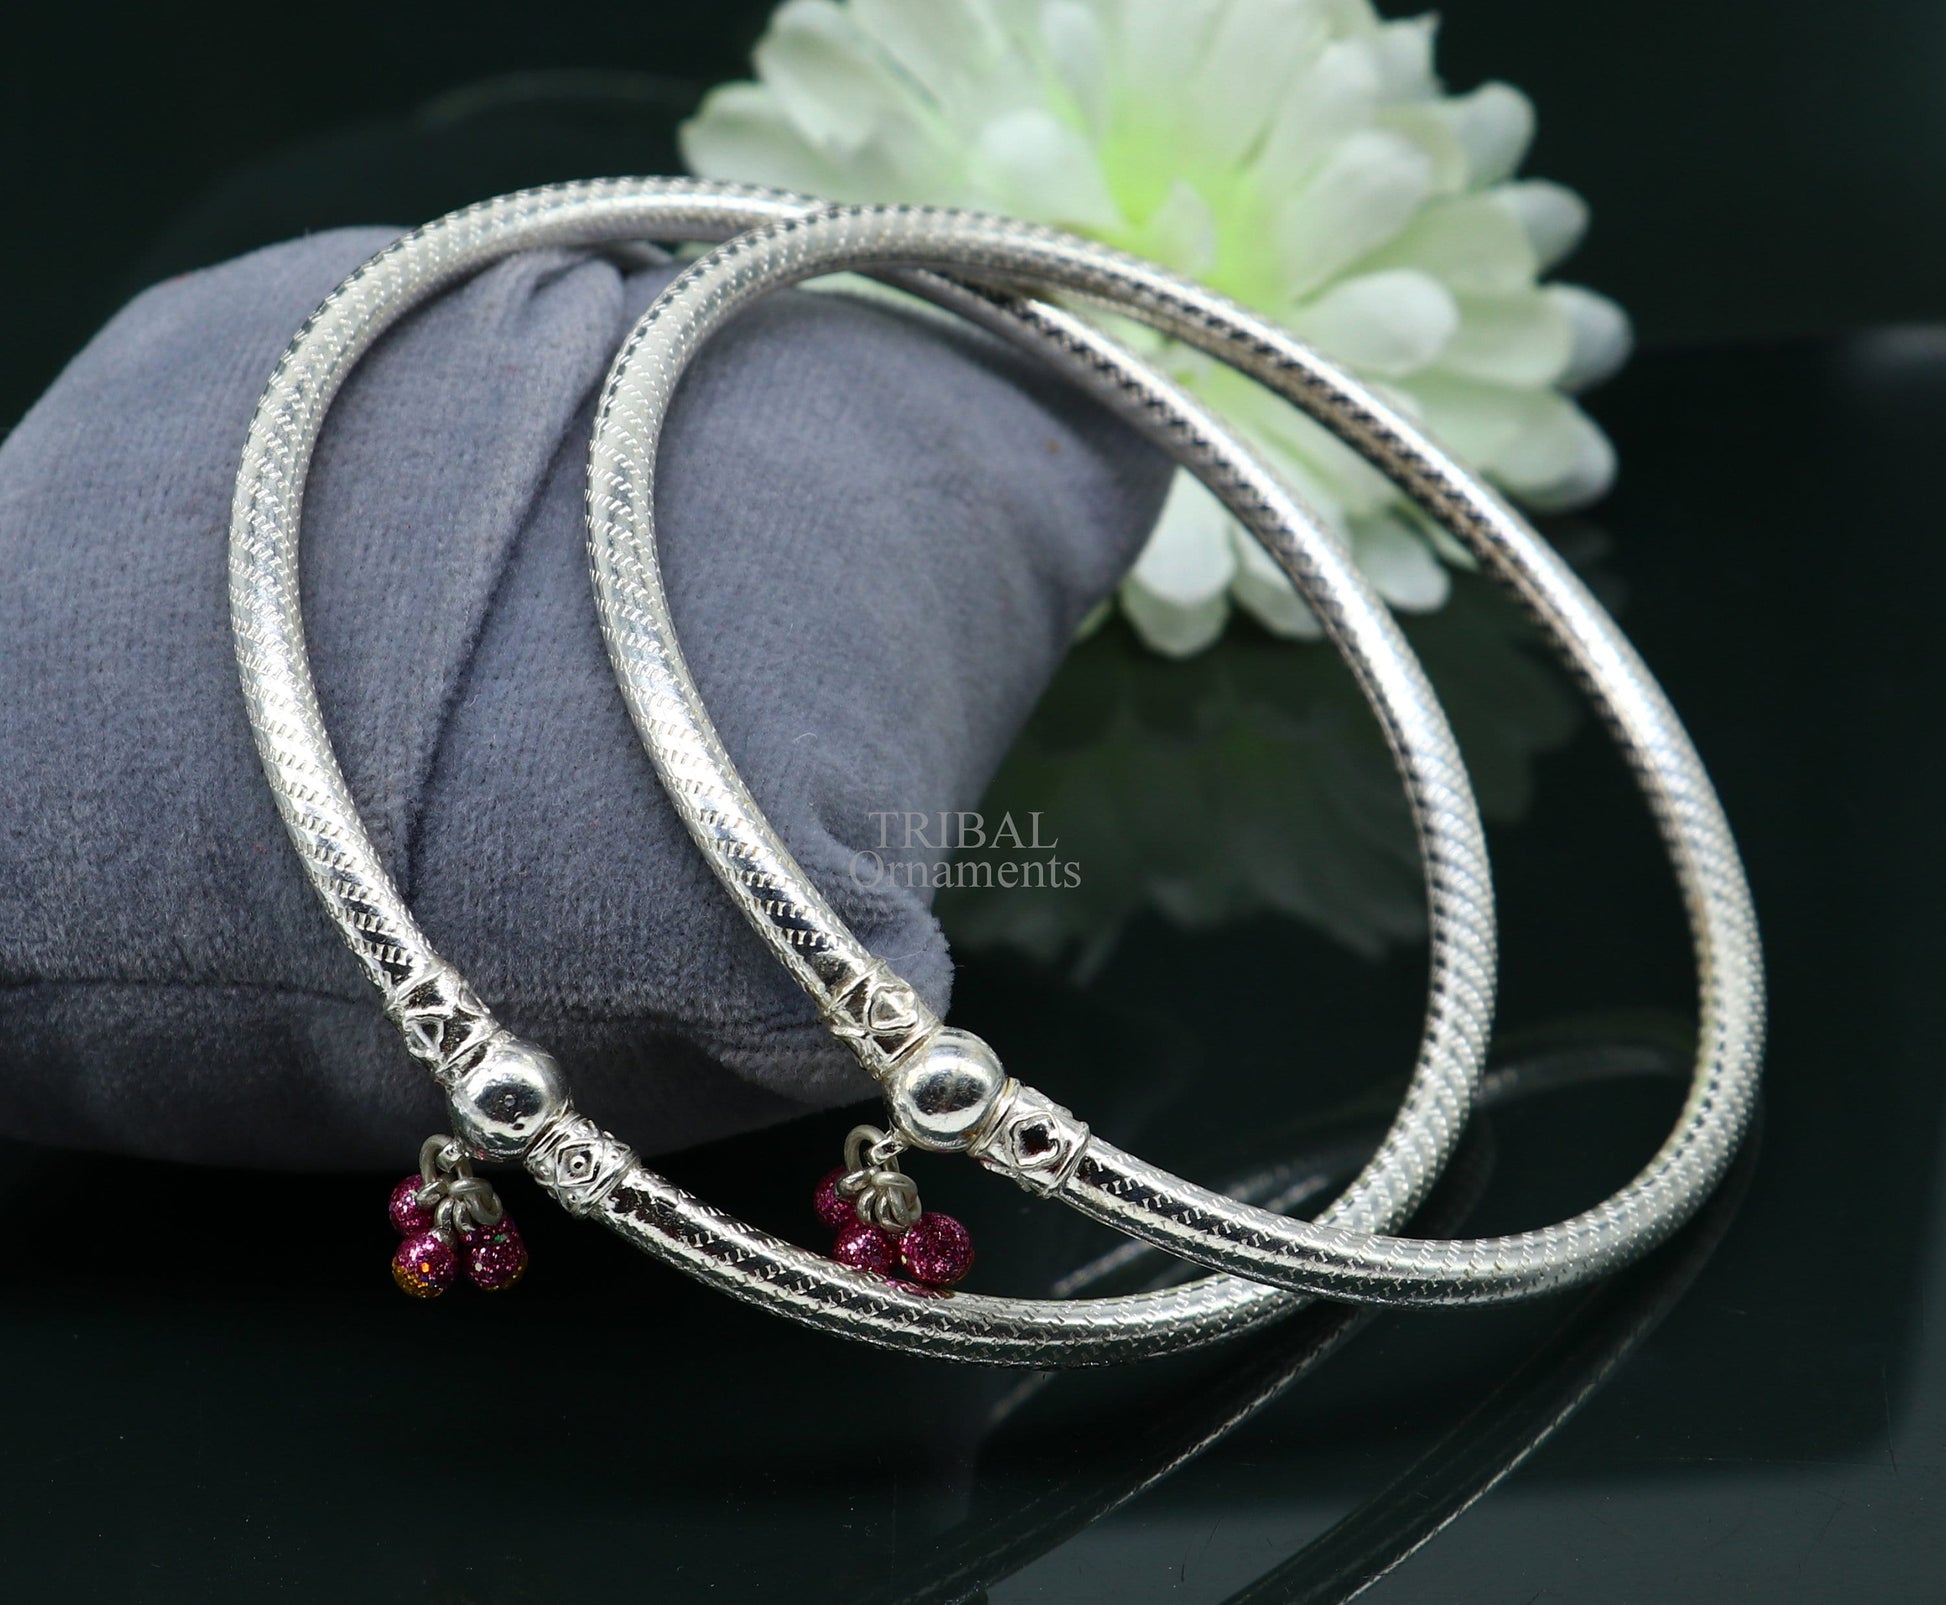 Traditional tribal ethnic sterling silver ankle jewelry, ankle  bangle bracelet, ankle kada with bells, amazing belly dance jewelry nsfk55 - TRIBAL ORNAMENTS